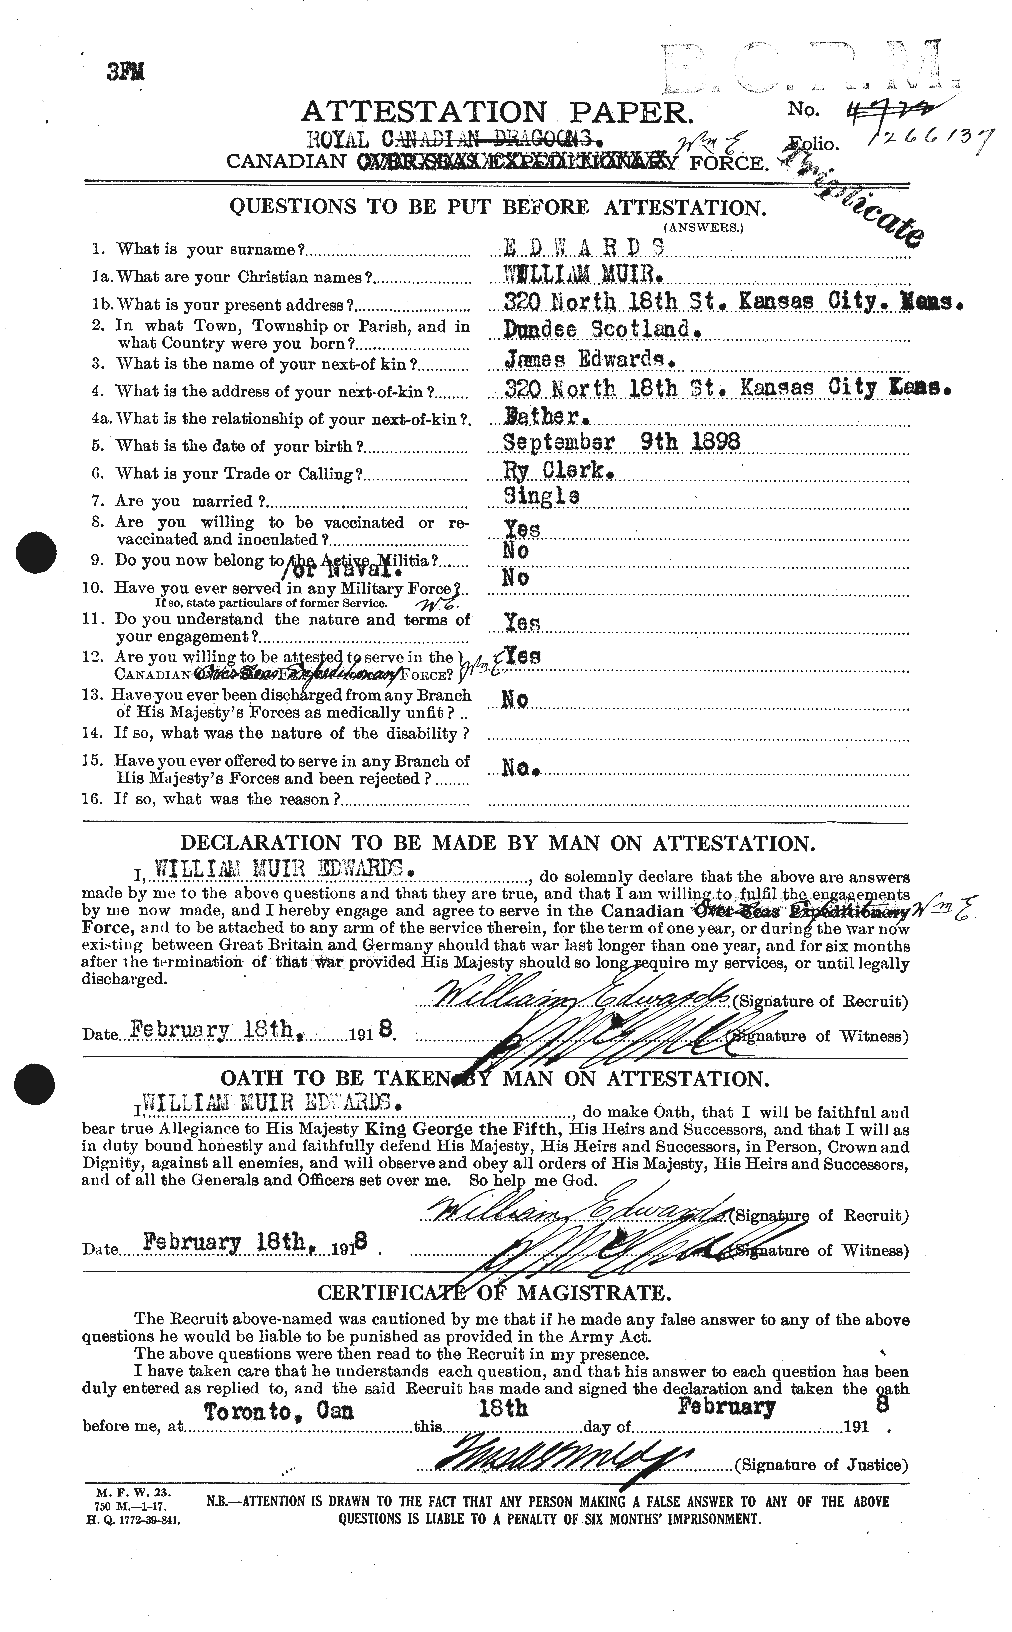 Personnel Records of the First World War - CEF 311933a